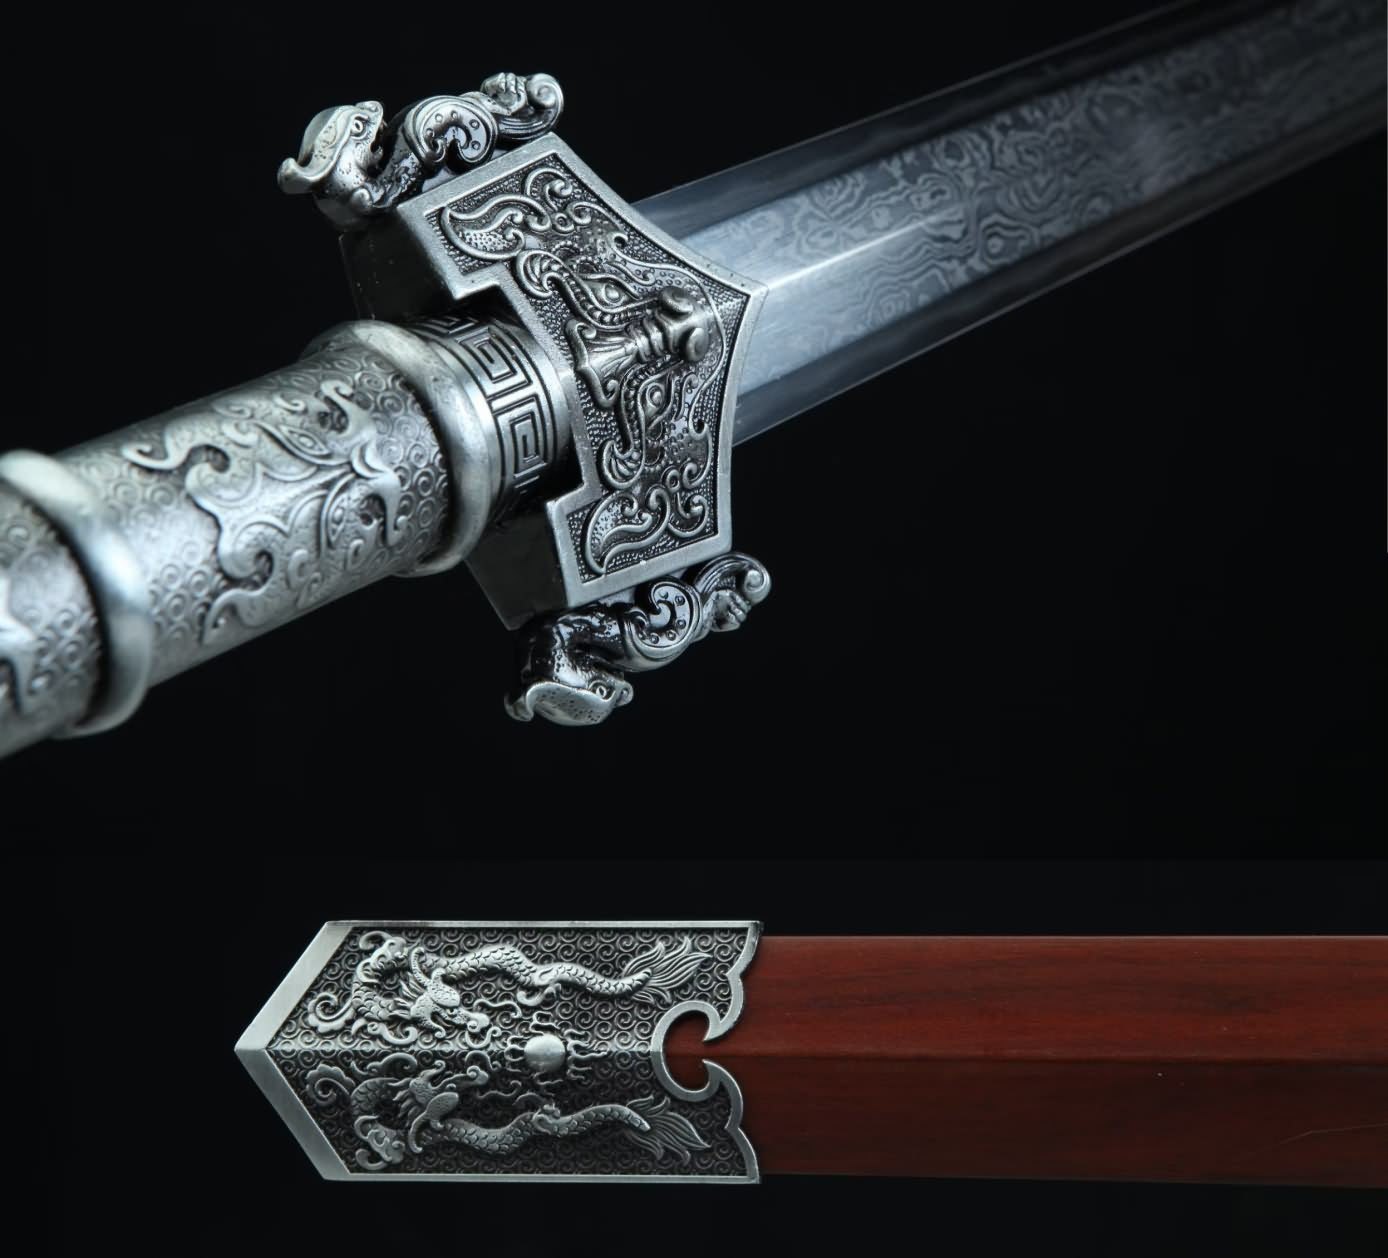 Han jian Swords Forged Damascus Steel Blade,Alloy Fittings,Rosewood Scabbard,LOONGSWORD